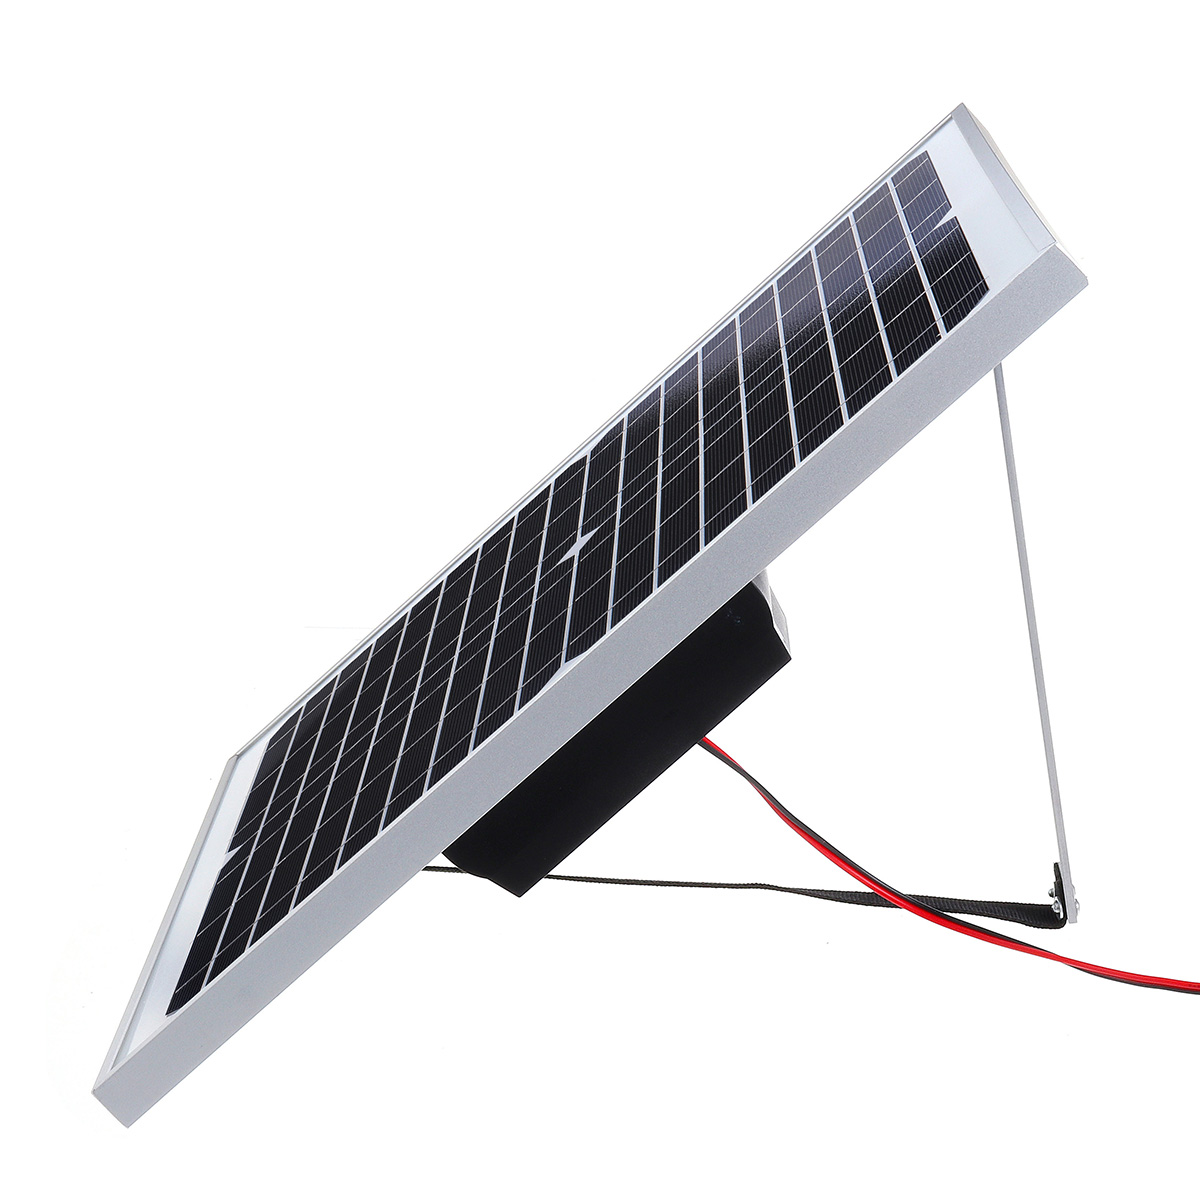 20W-Portable-Solar-Panel-USB-Battery-Charger-w-10A-Solar-Controller-For-Camping-Travelling-Phone-Cha-1476907-2